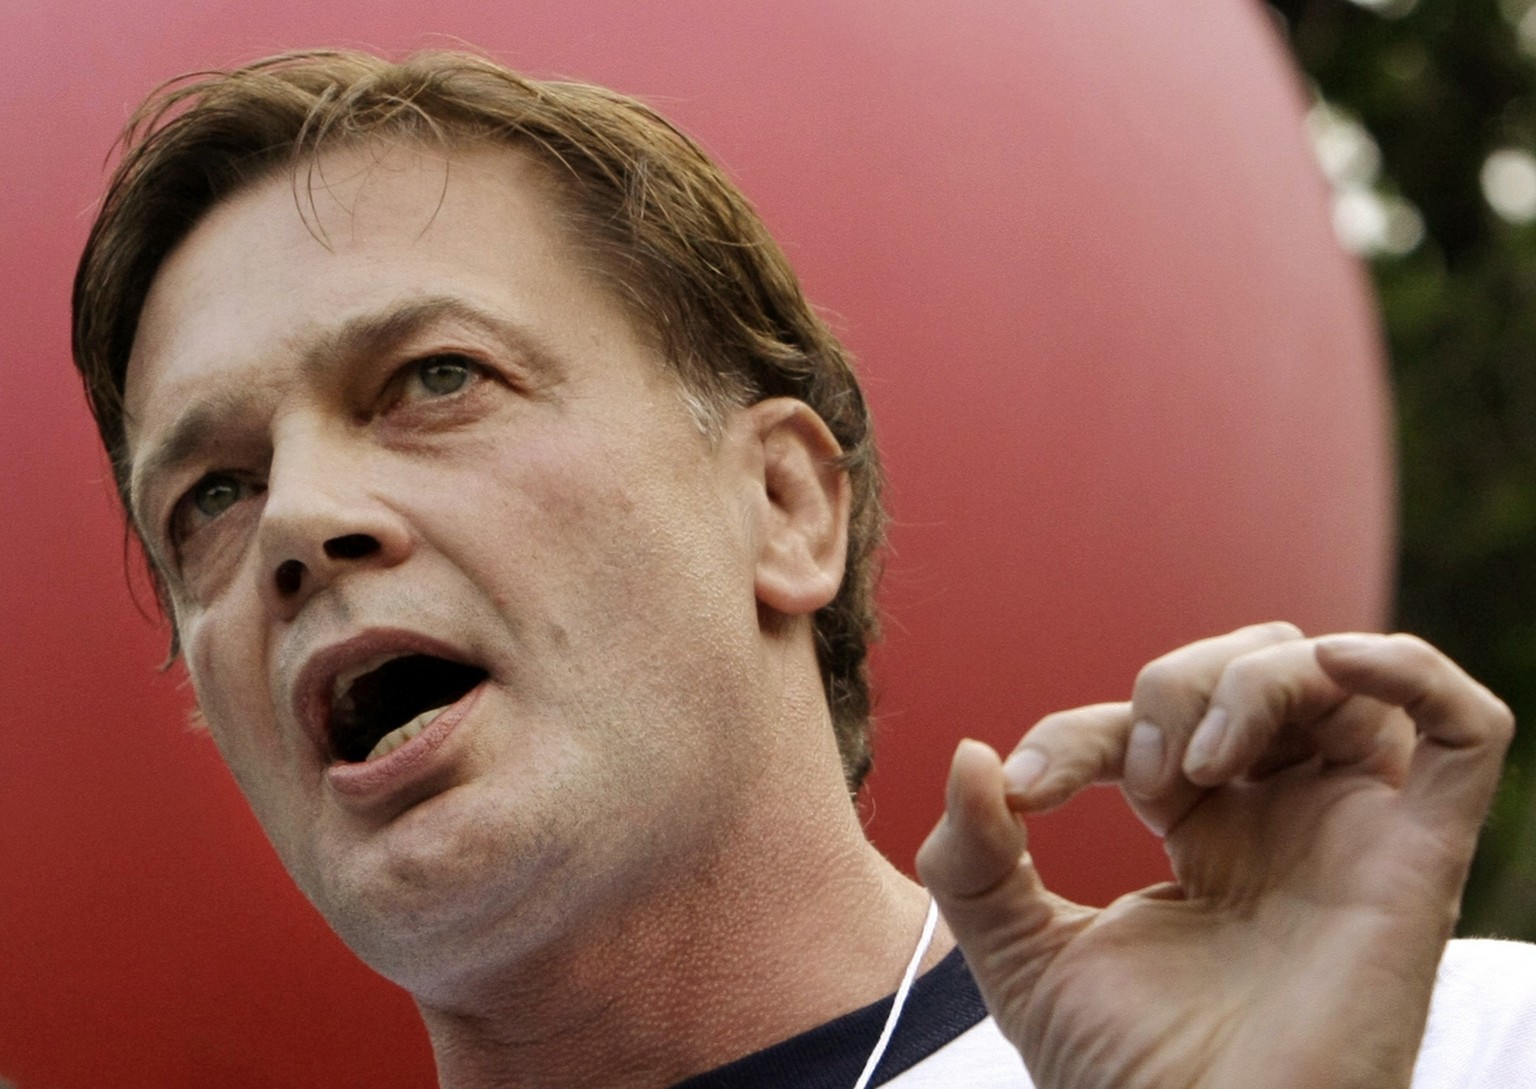 FILE - In this May 26, 2010 file photo, Dr. Andrew Wakefield addresses a gathering hosted by the American Rally For Personal Rights in Chicago&#039;s Grant Park. A 1998 paper by Wakefield, which was t ...